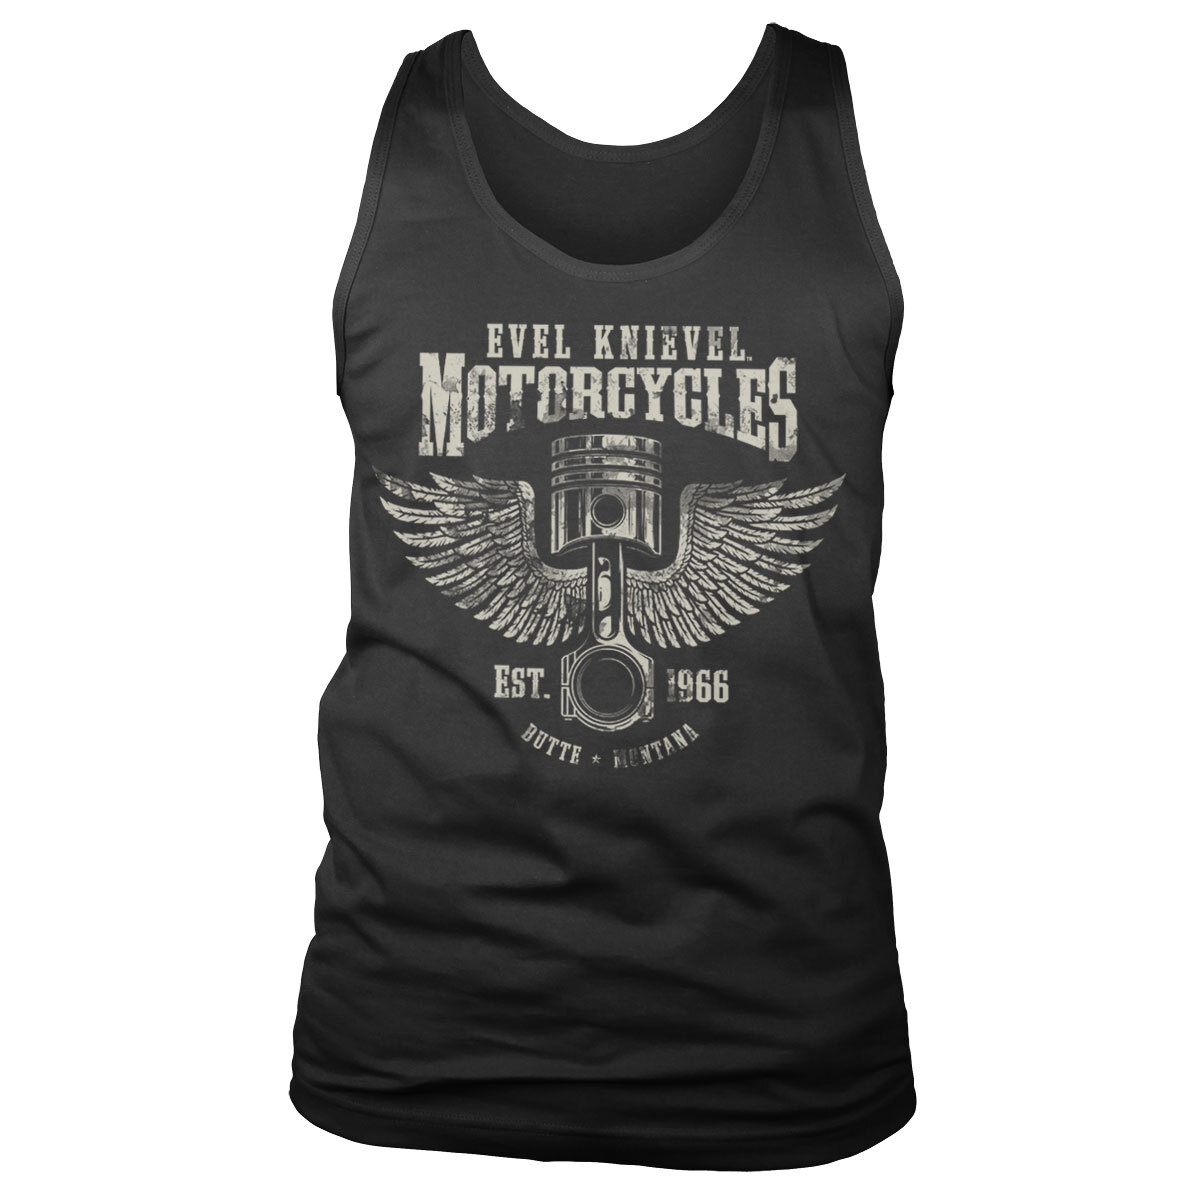 Evel Knievel Motorcycles Tank Top